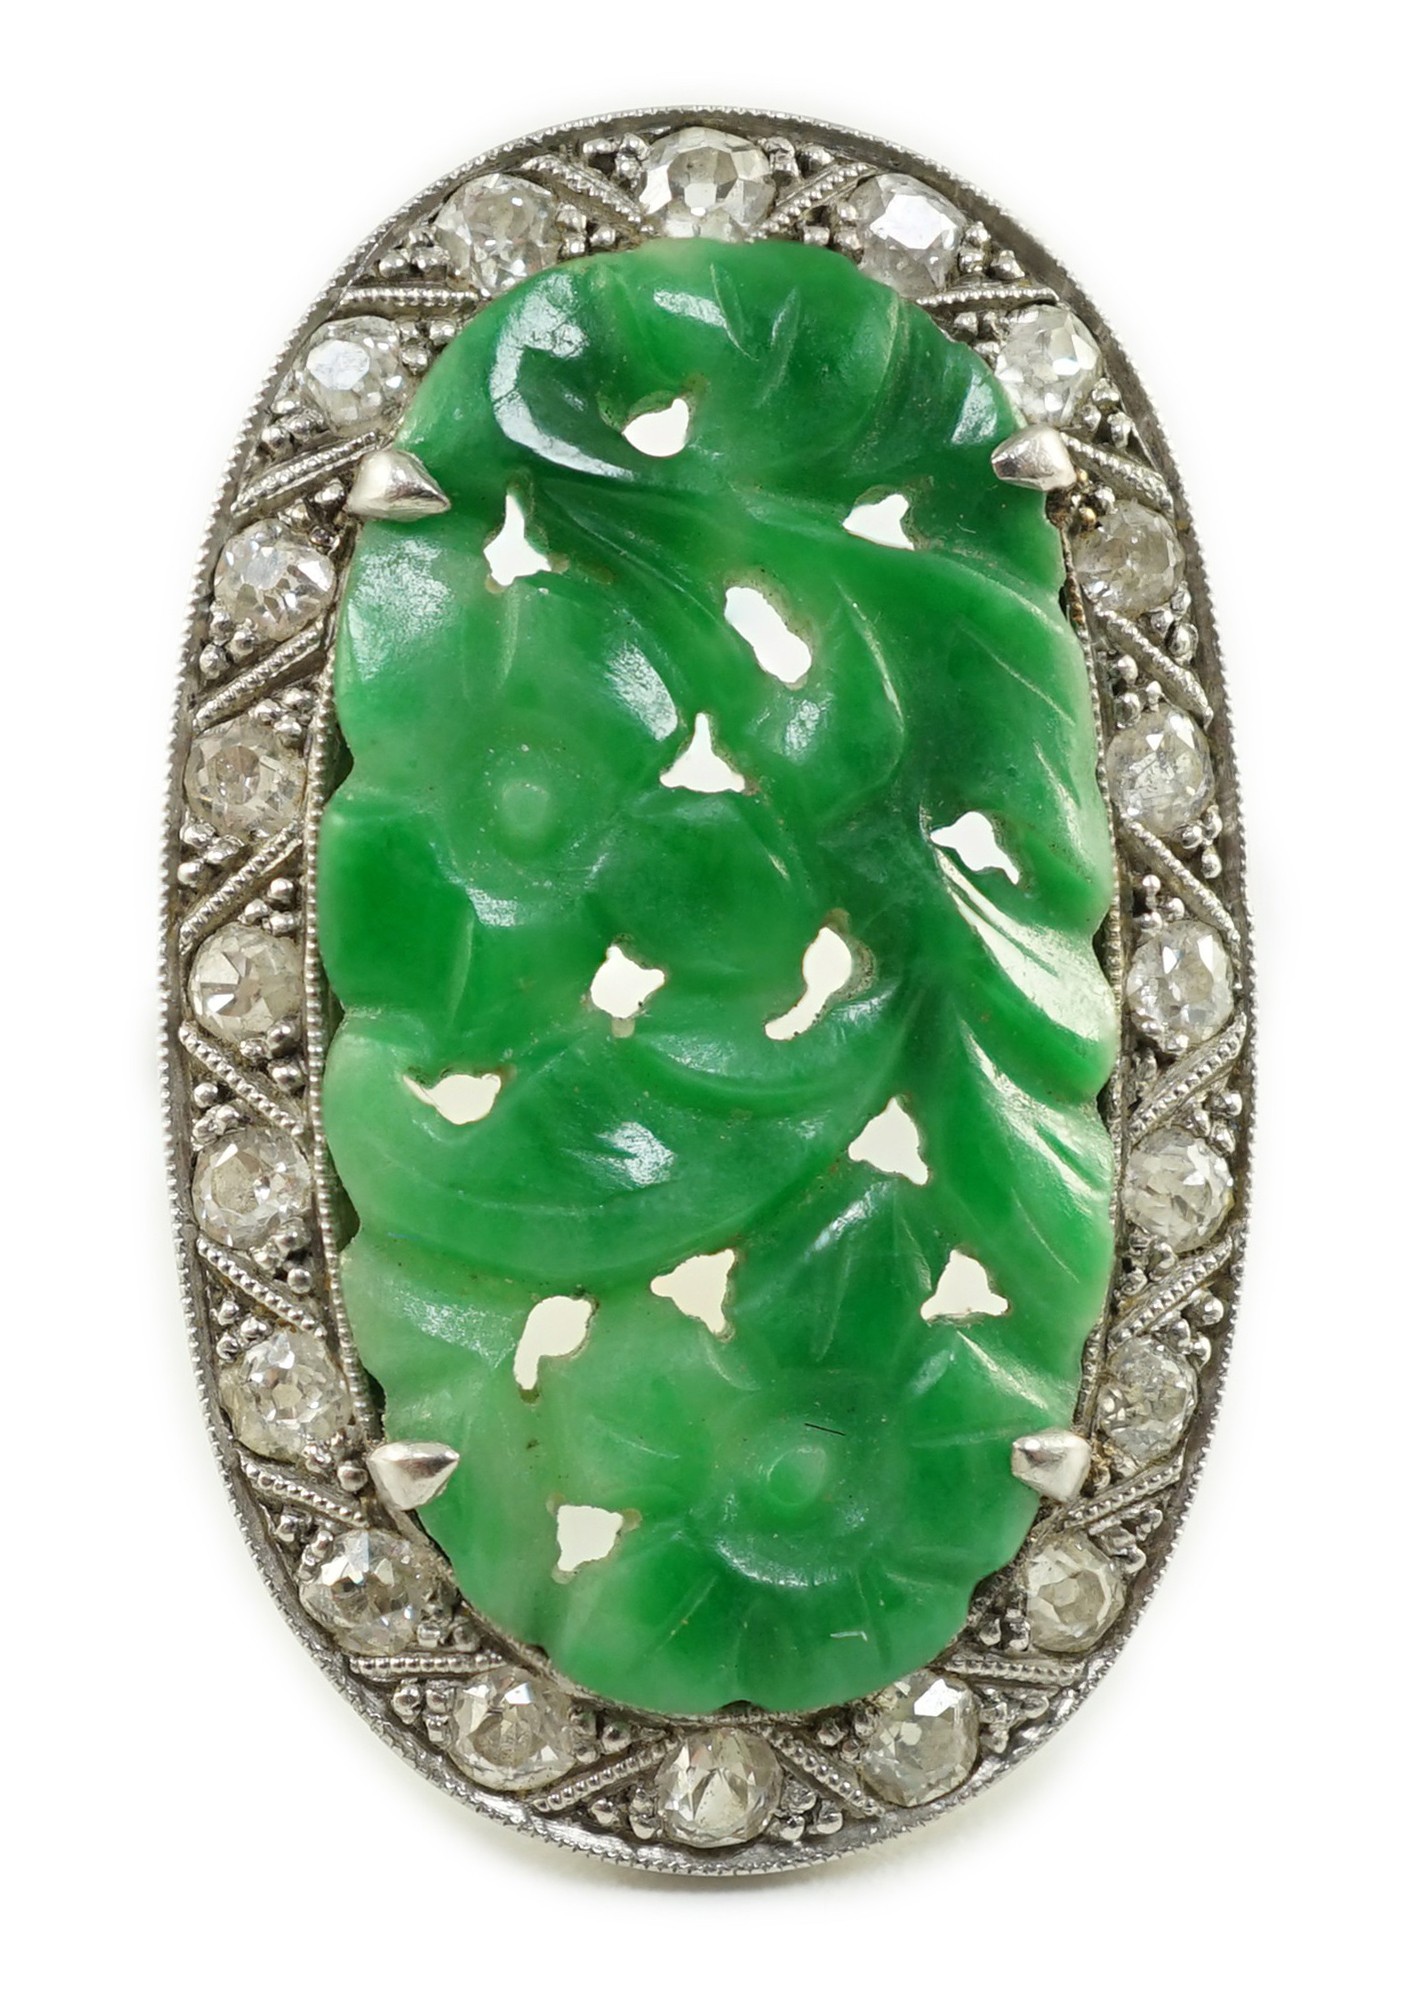 A 1920's/1930's white gold, jadeite and diamond set oval dress ring                                                                                                                                                         